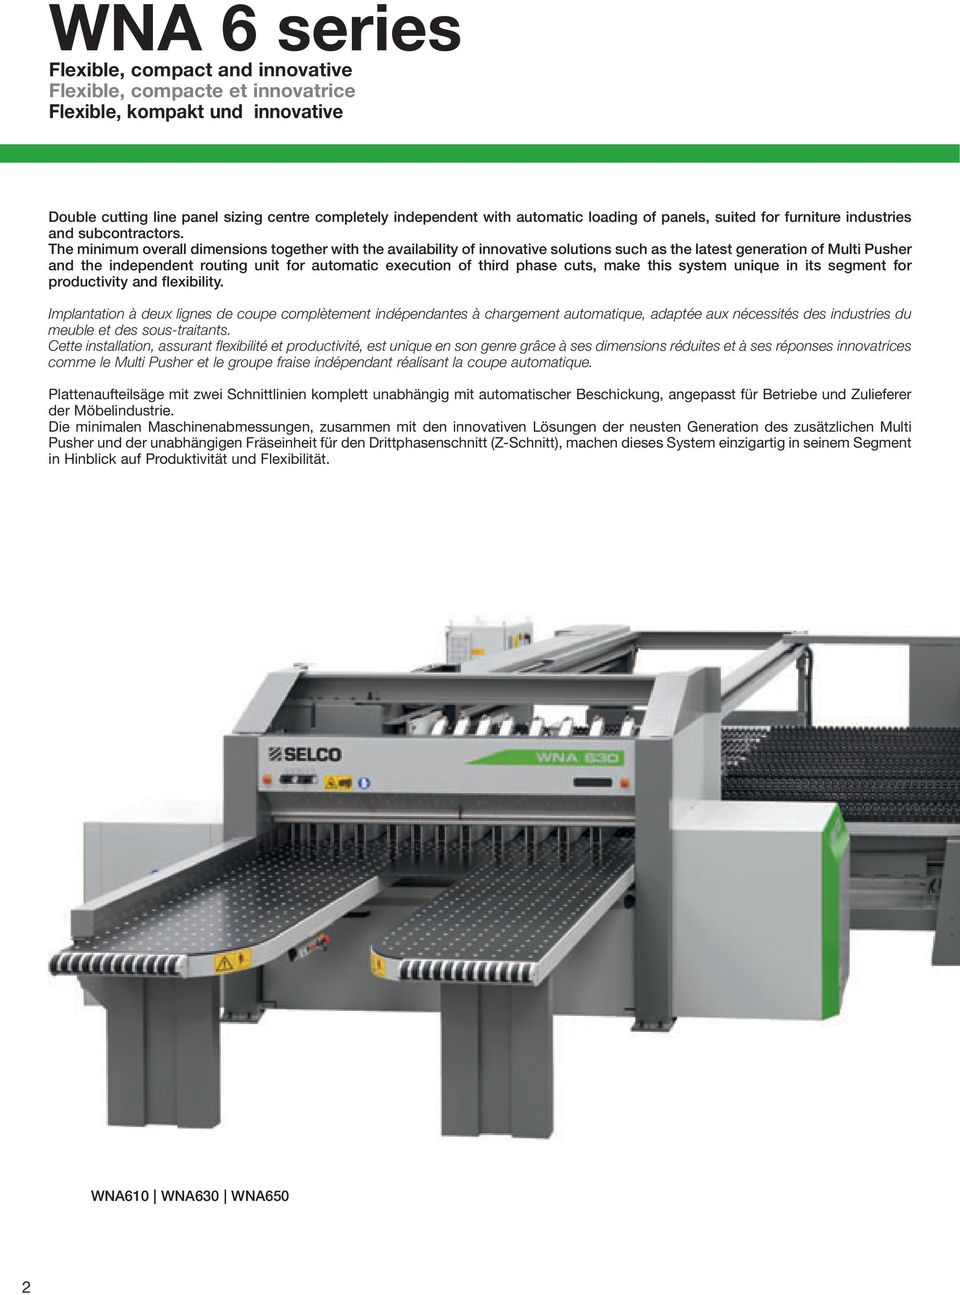 The minimum overall dimensions together with the availability of innovative solutions such as the latest generation of Multi Pusher and the independent routing unit for automatic execution of third